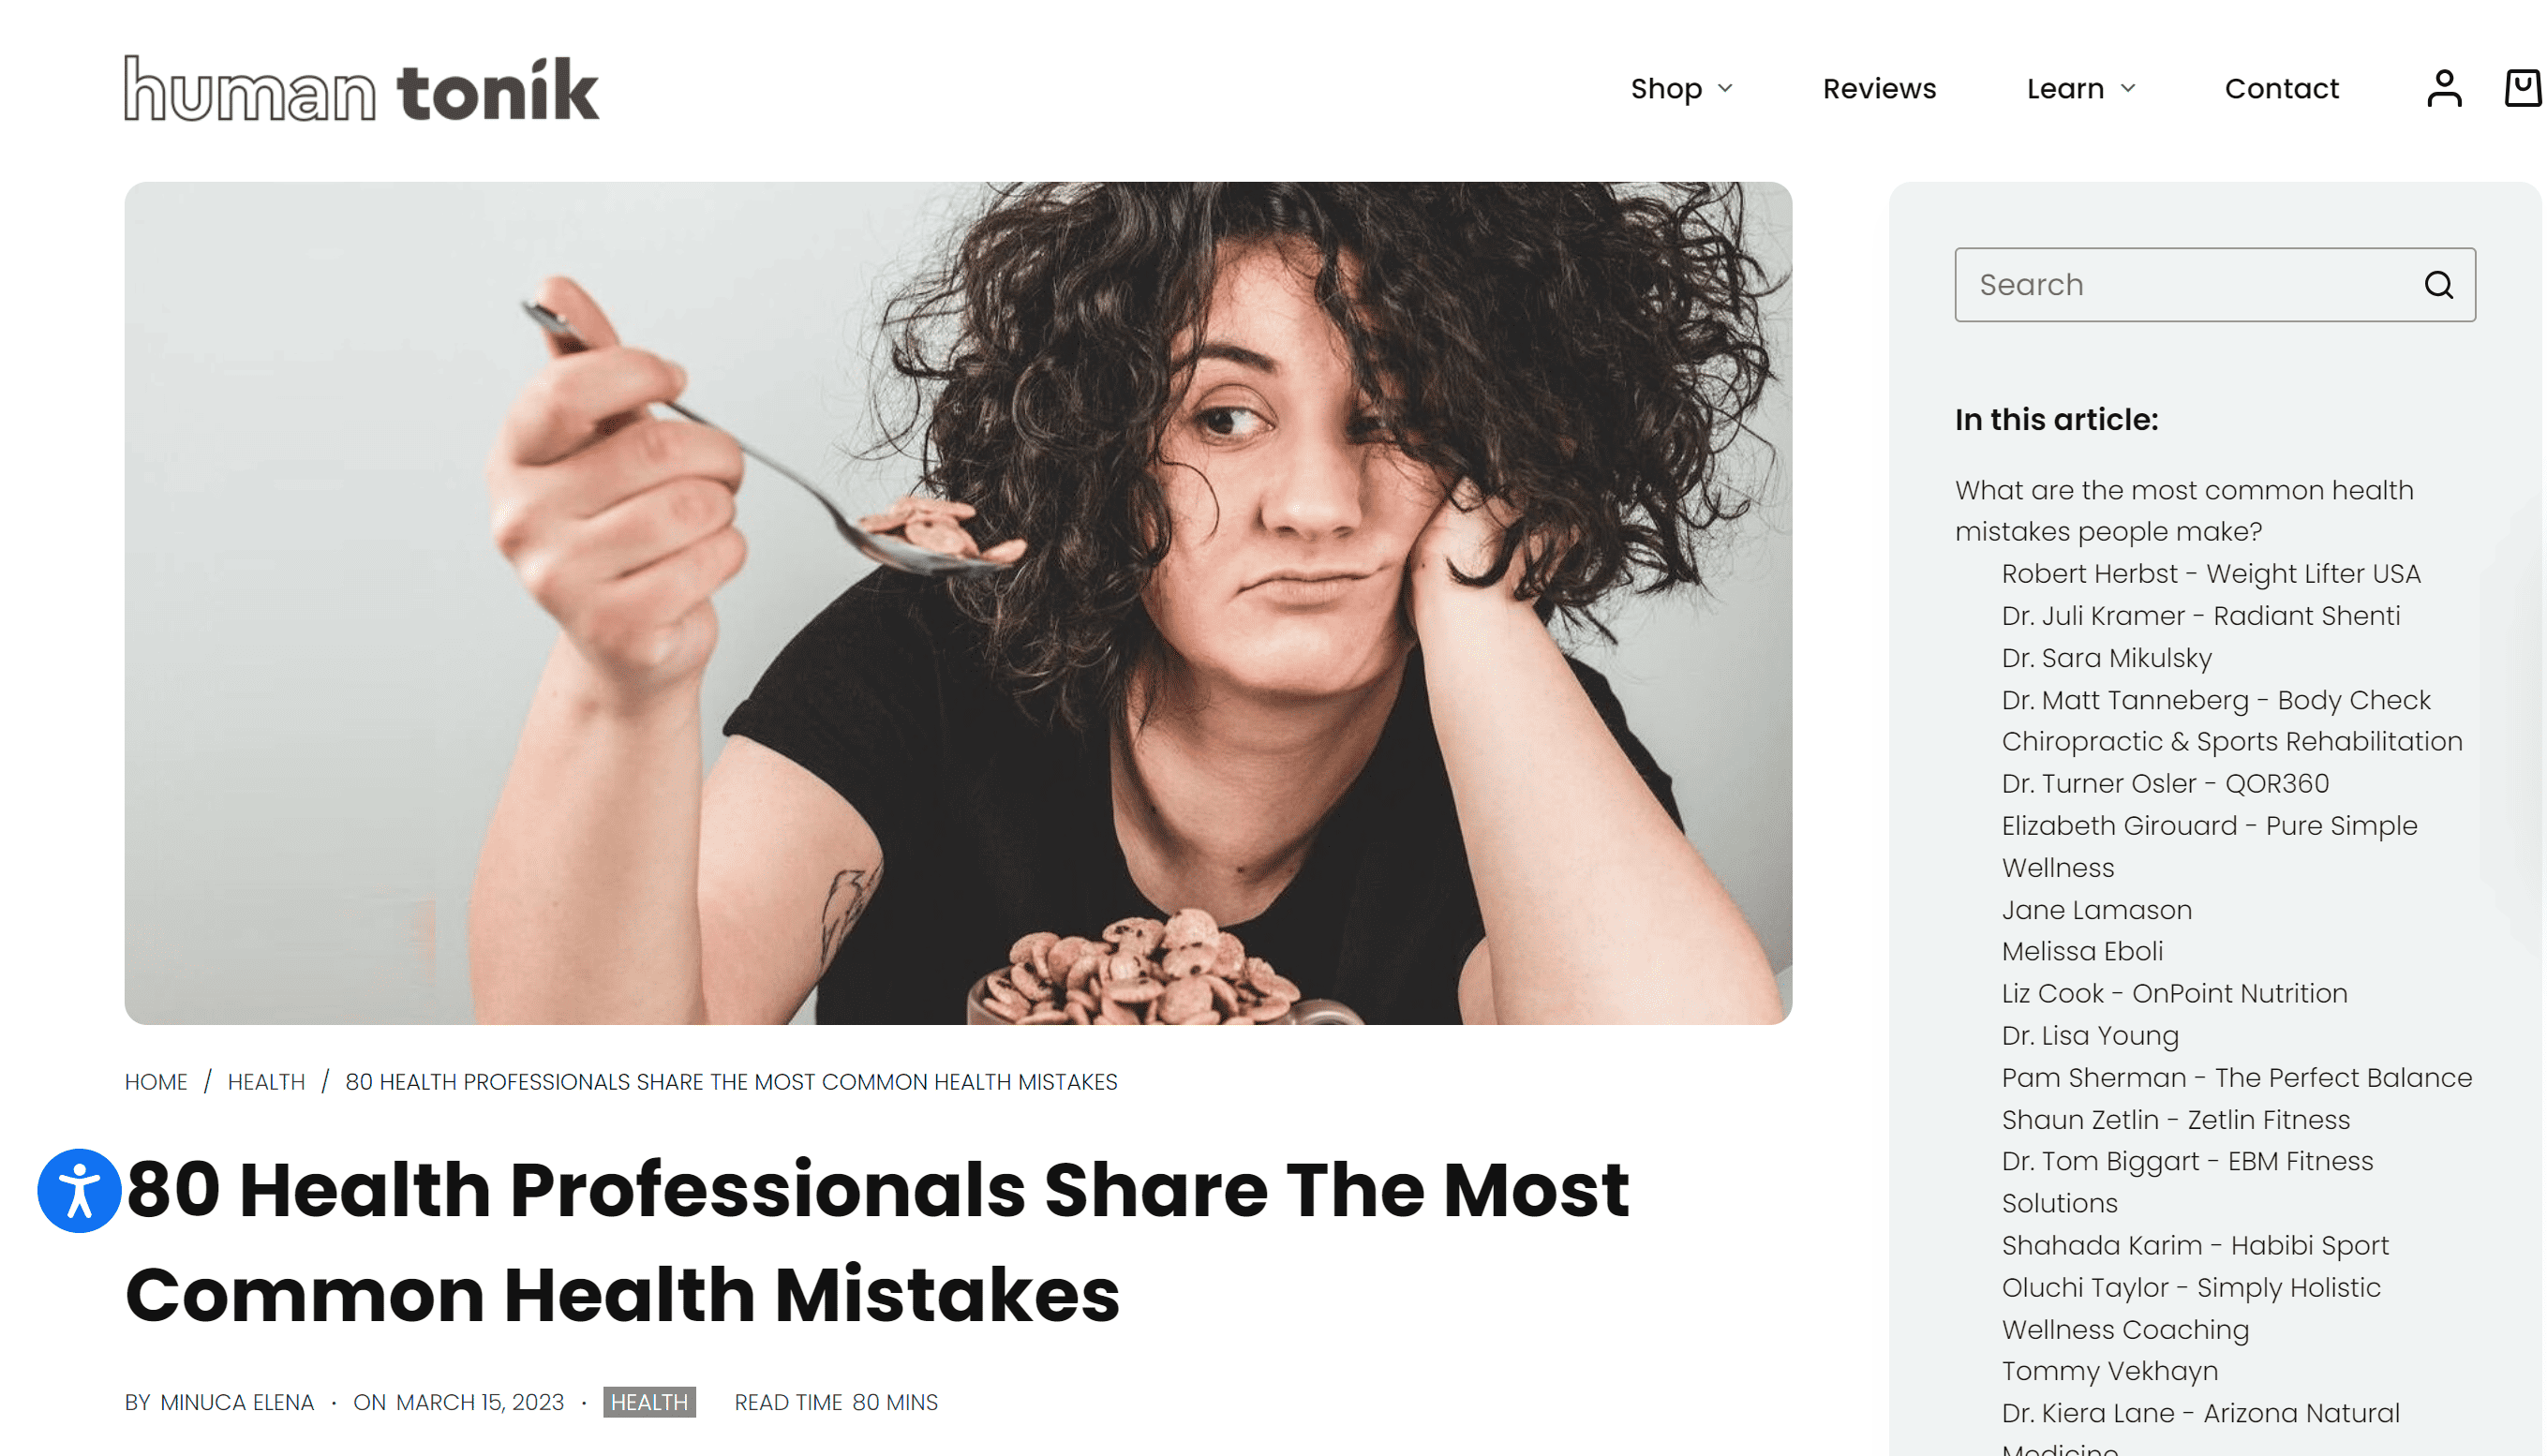 Expert roundup about health mistakes